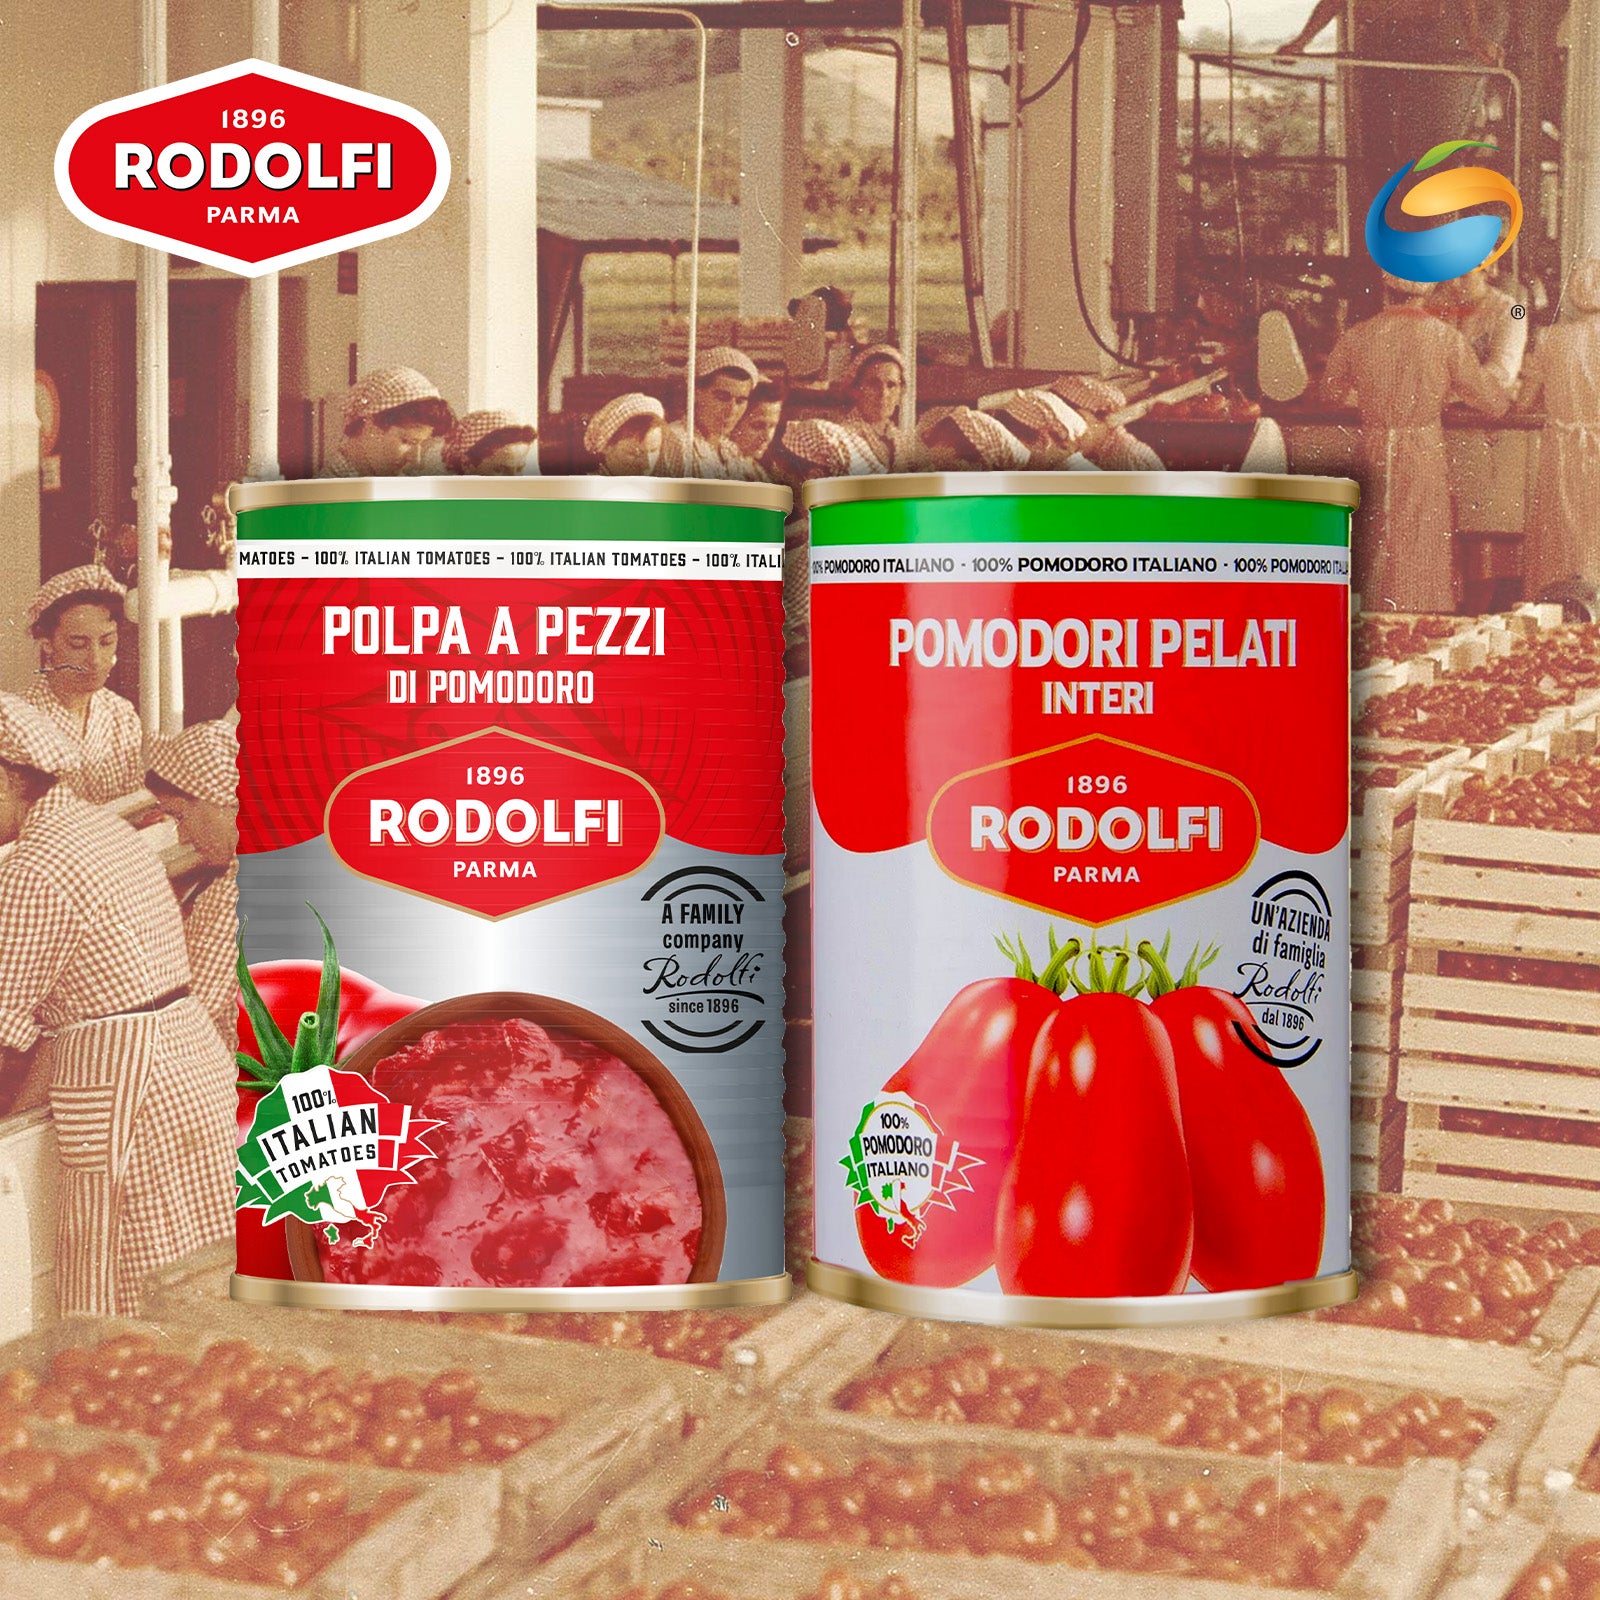 RODOLFI Traditional Canned Tomatoes